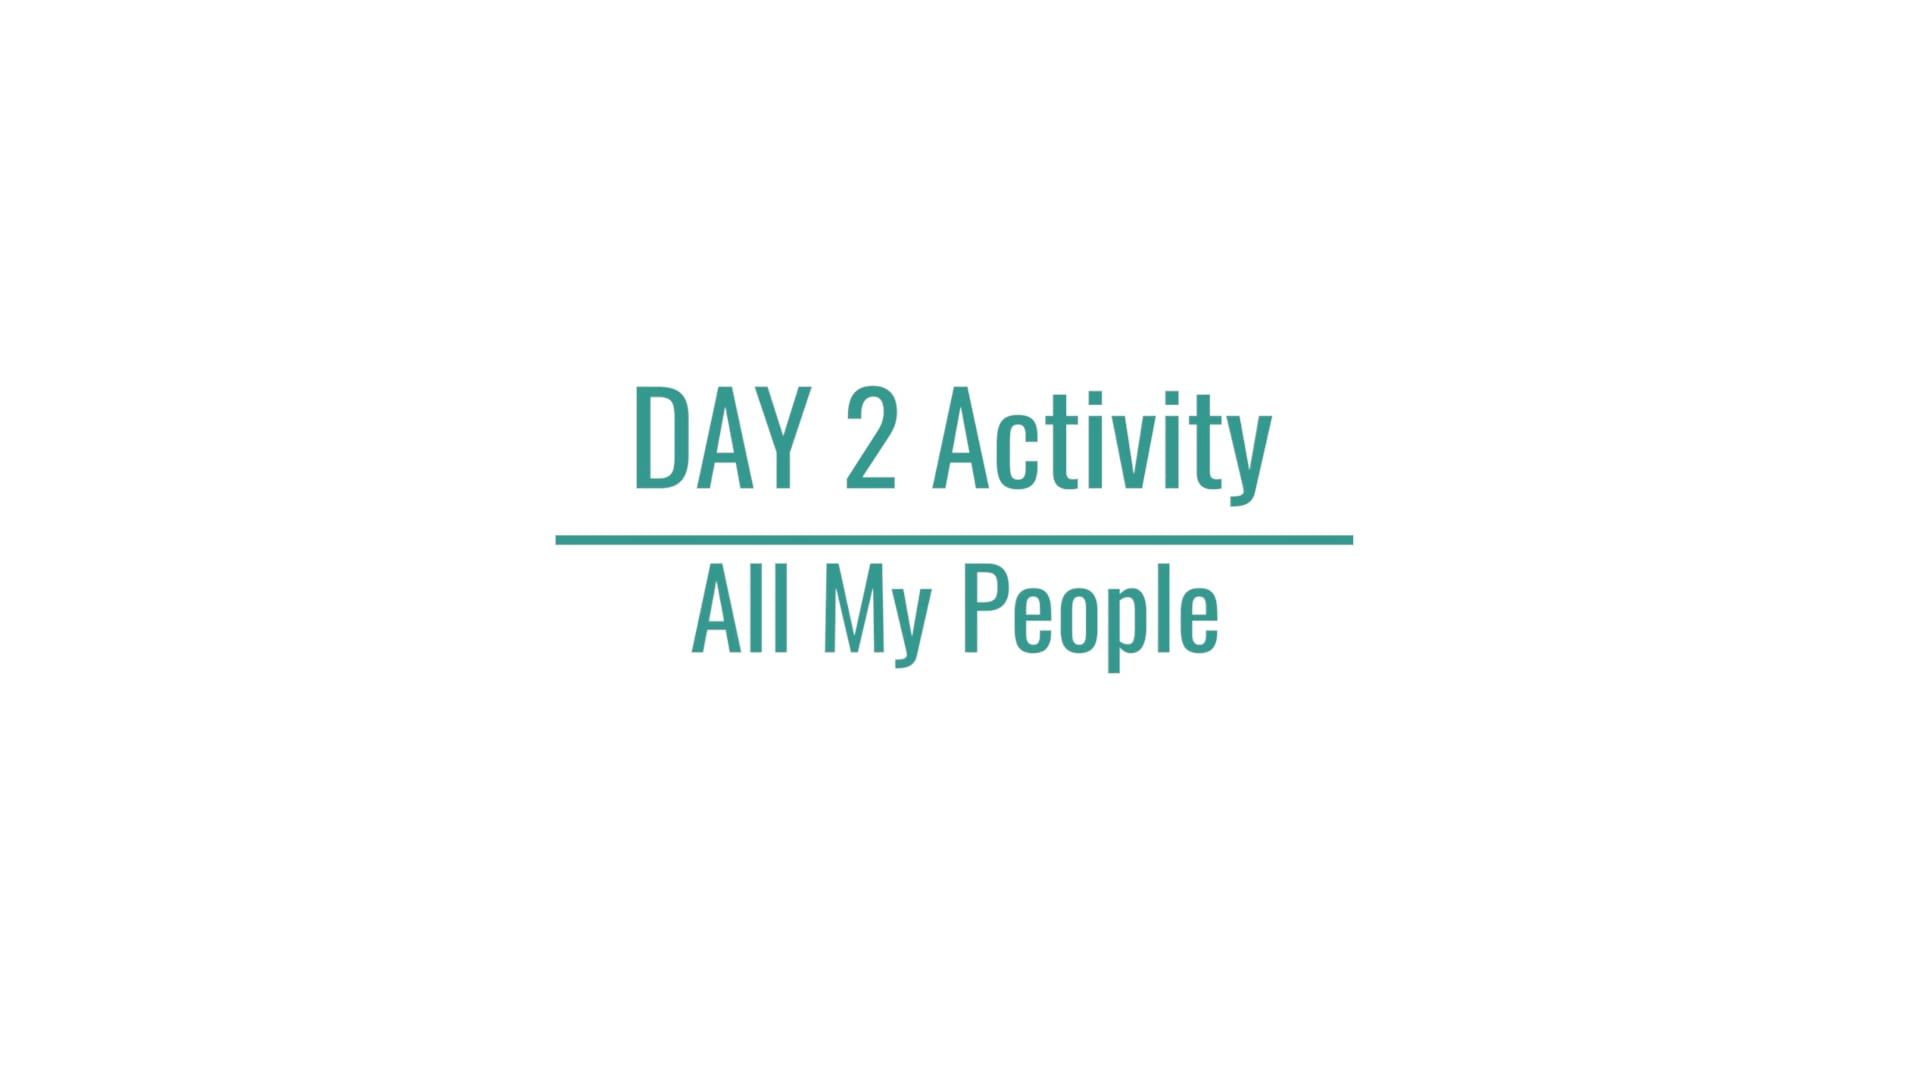 Day 2 Activity: All My People